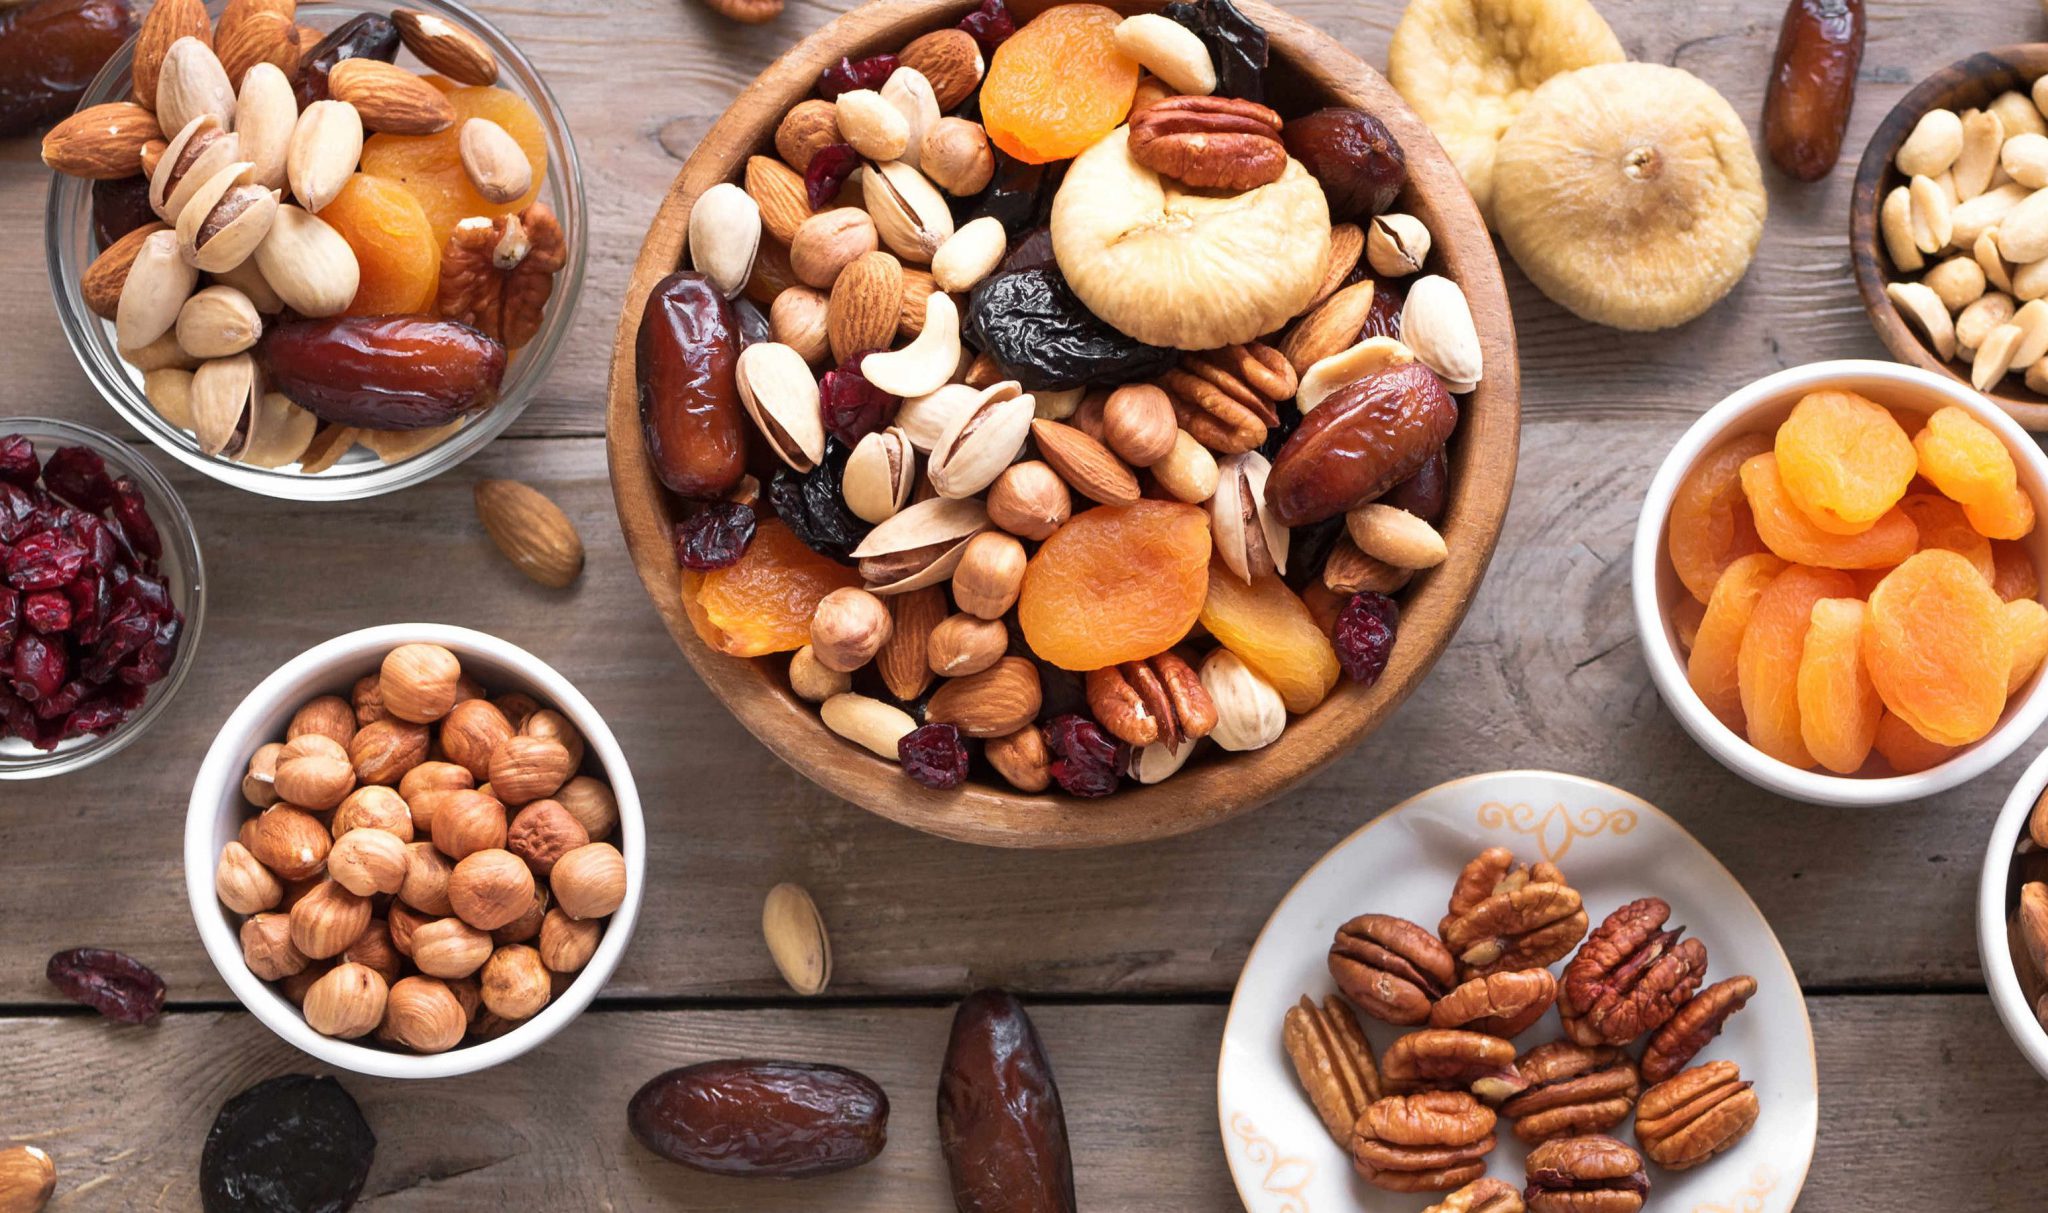 Wholesale nuts | Manufacturer nuts and dried fruits - Nutex Company